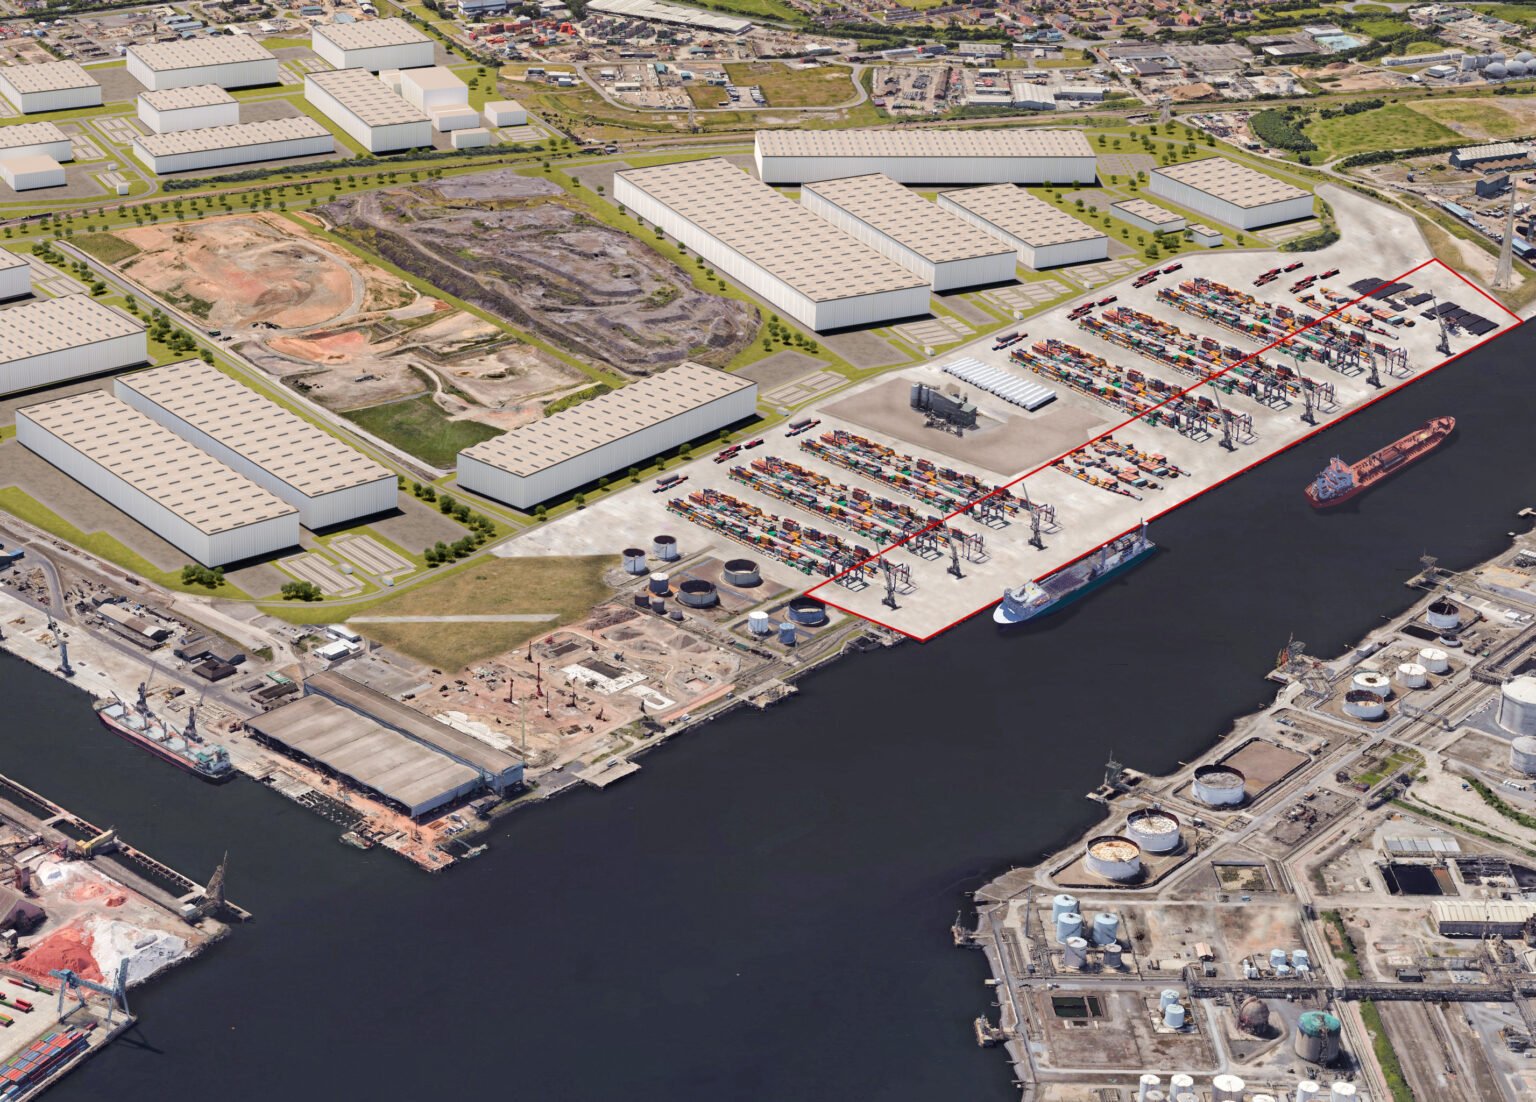 Tees Valley Aims for Offshore Wind Top Spot with GBP 90 Million Quay